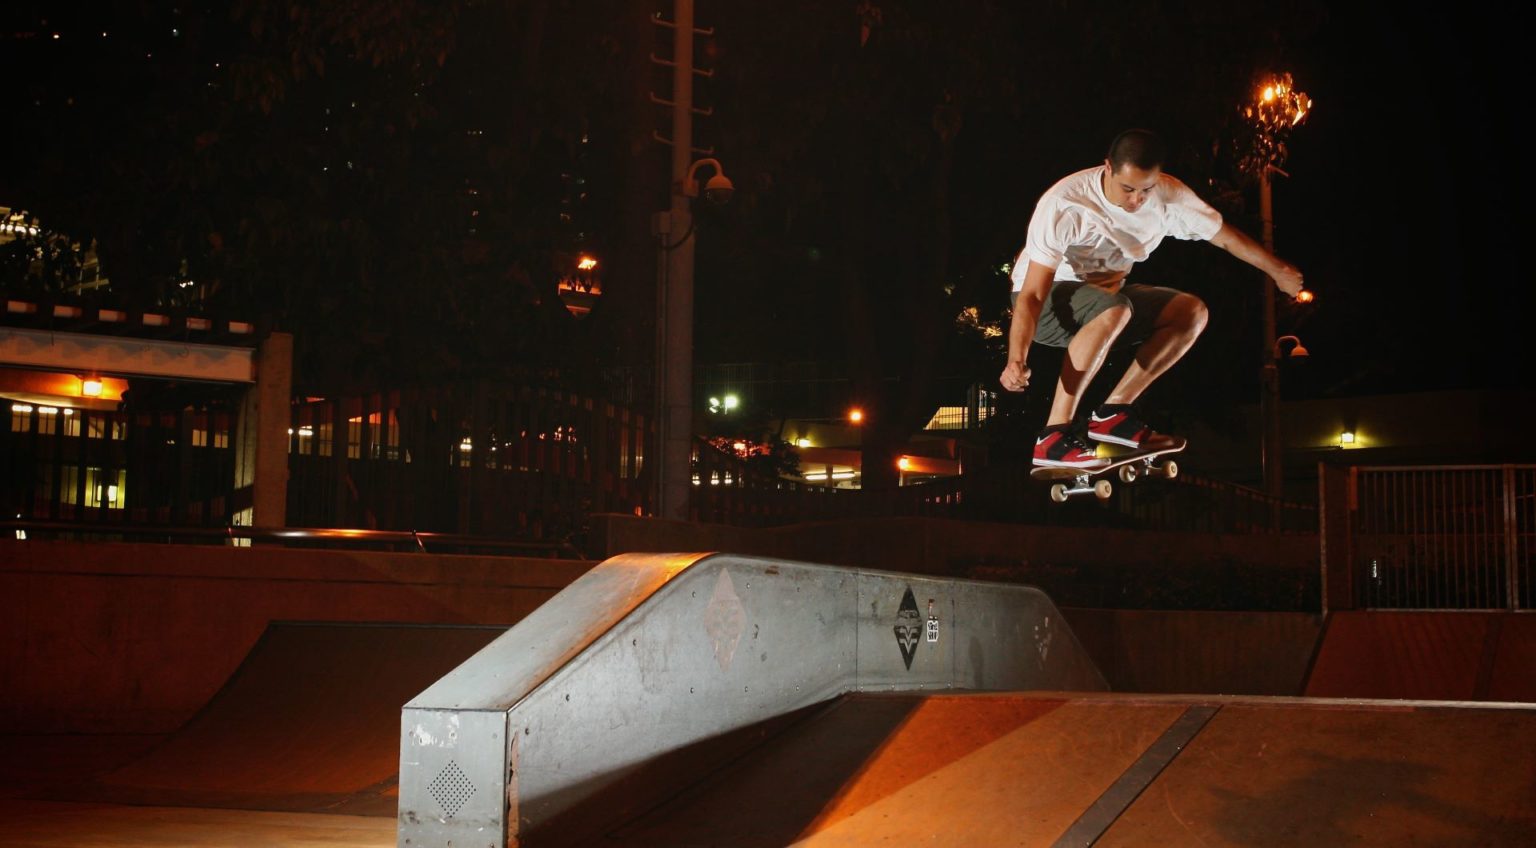 A skateboarder performs a trick at night.